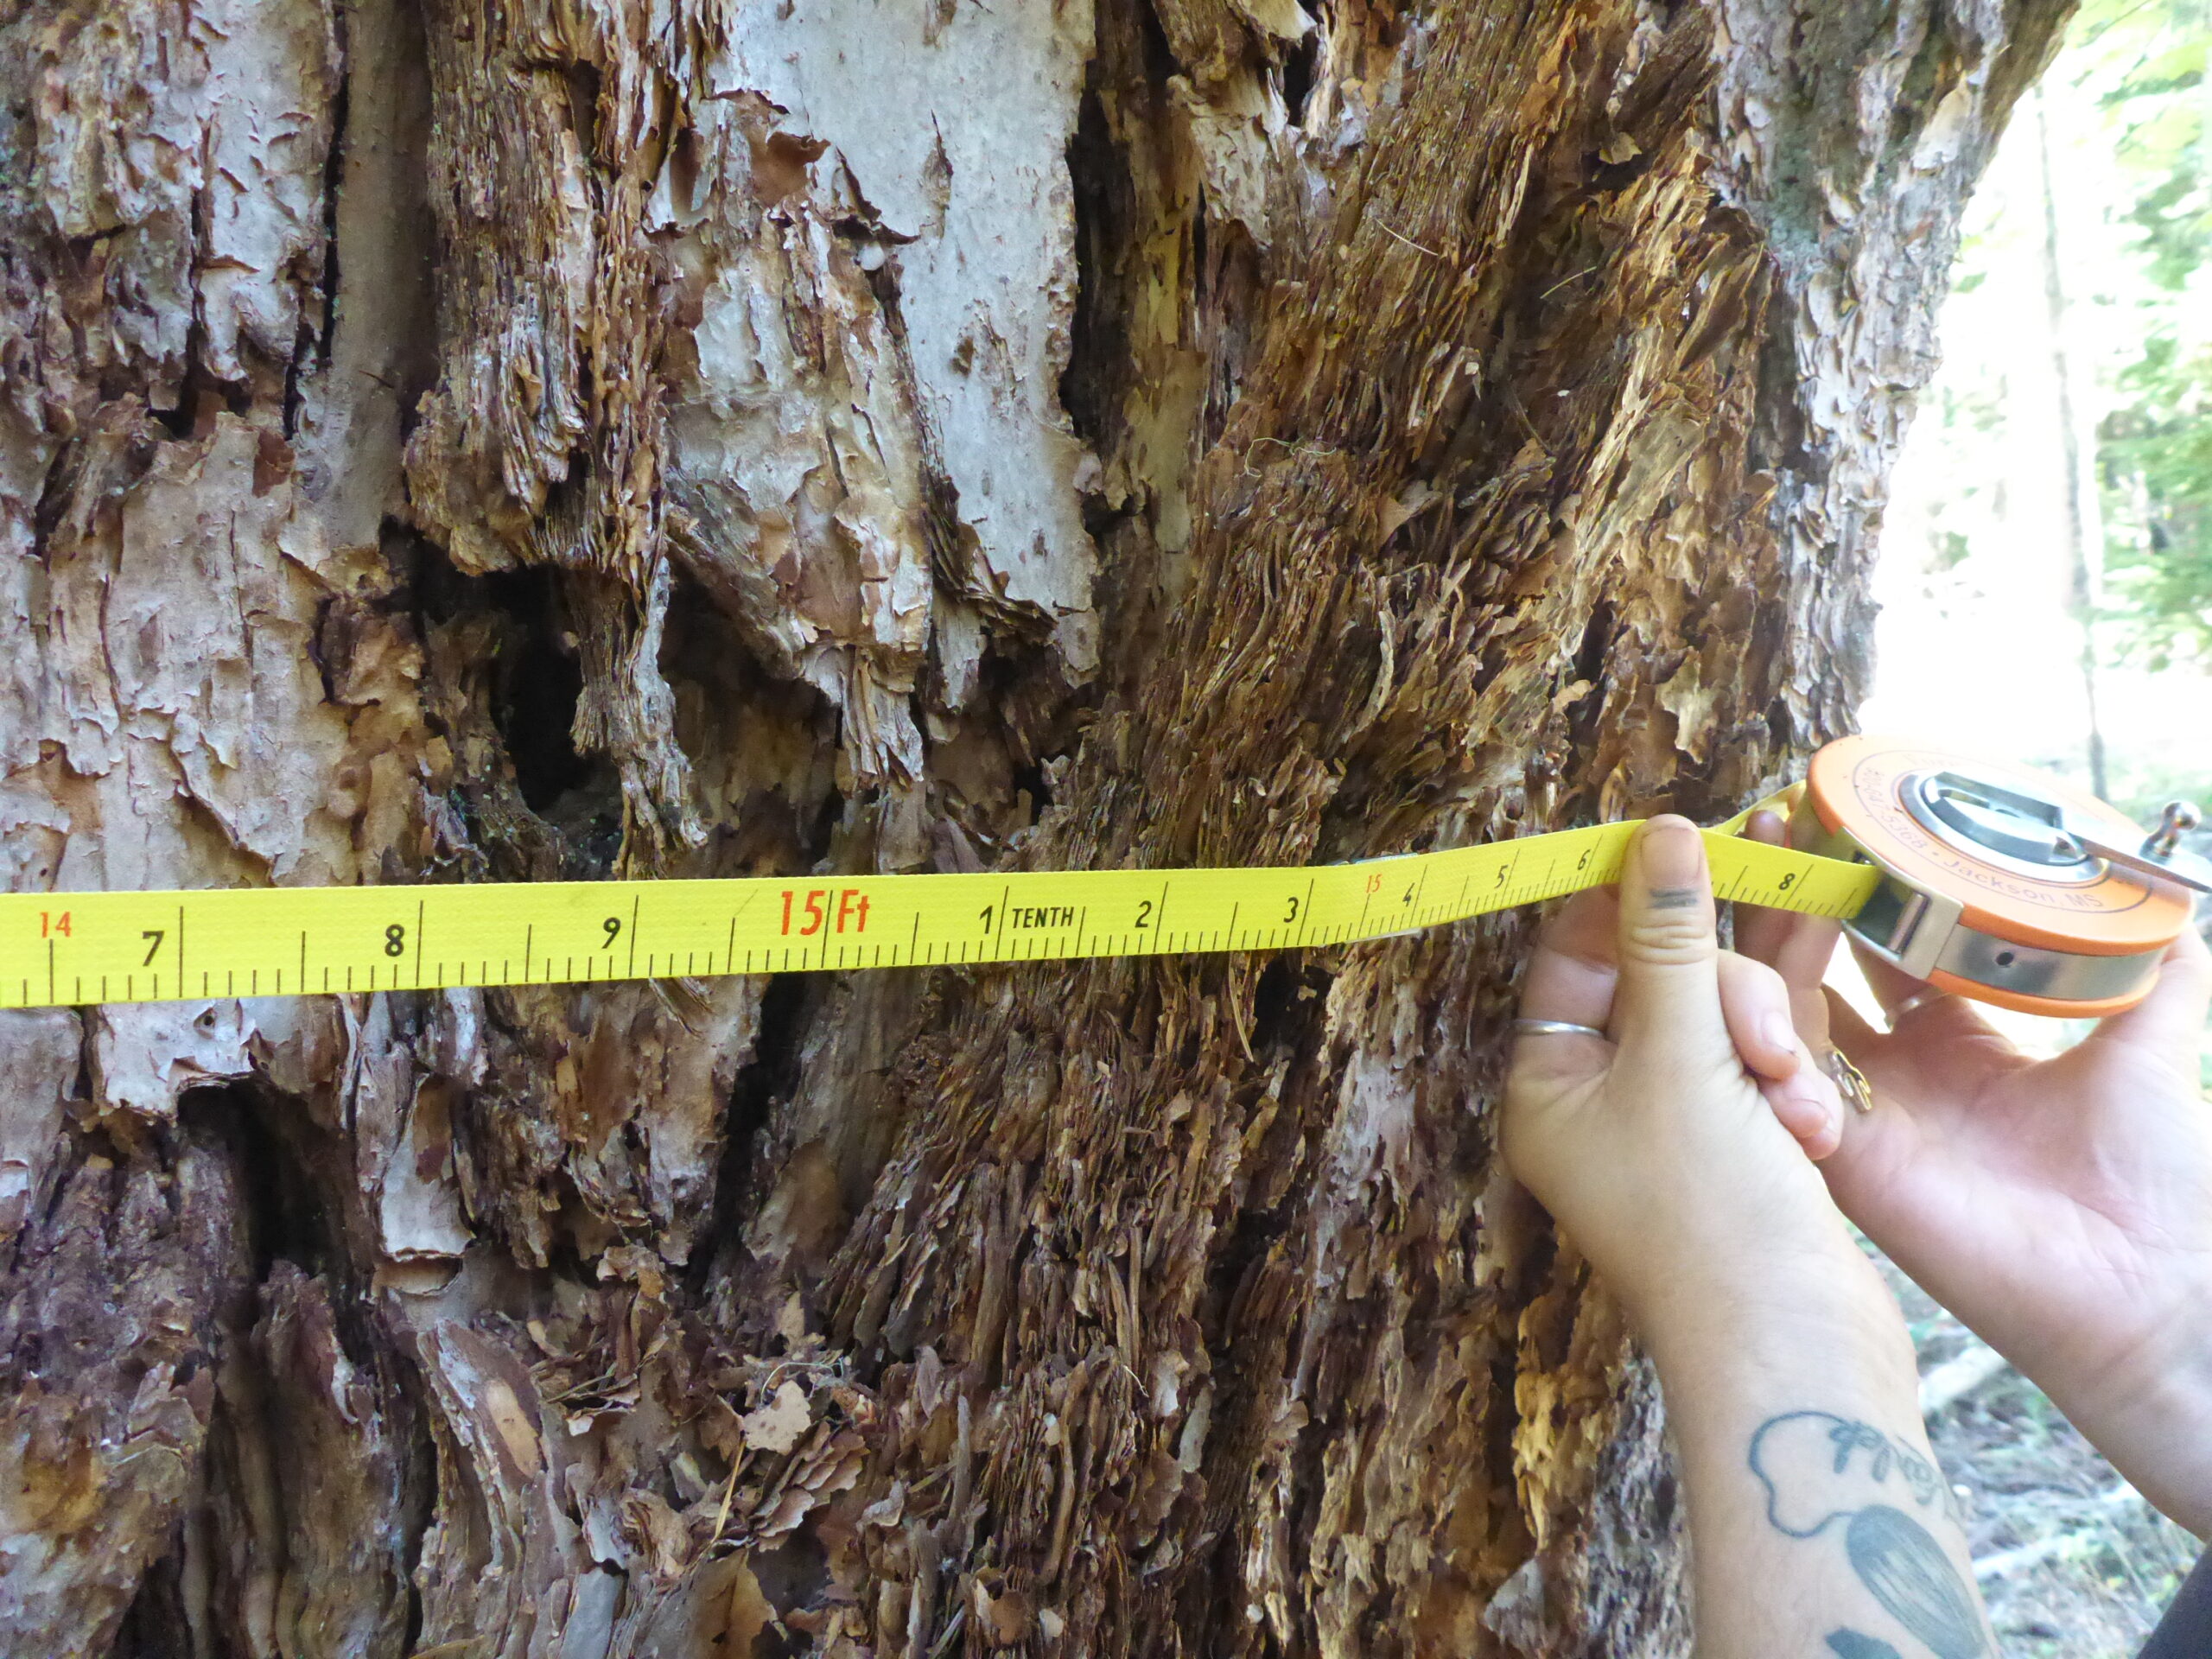 Color photo close up of a person's hands holding a measuring tape up to the gnarled trunk of a large tree.